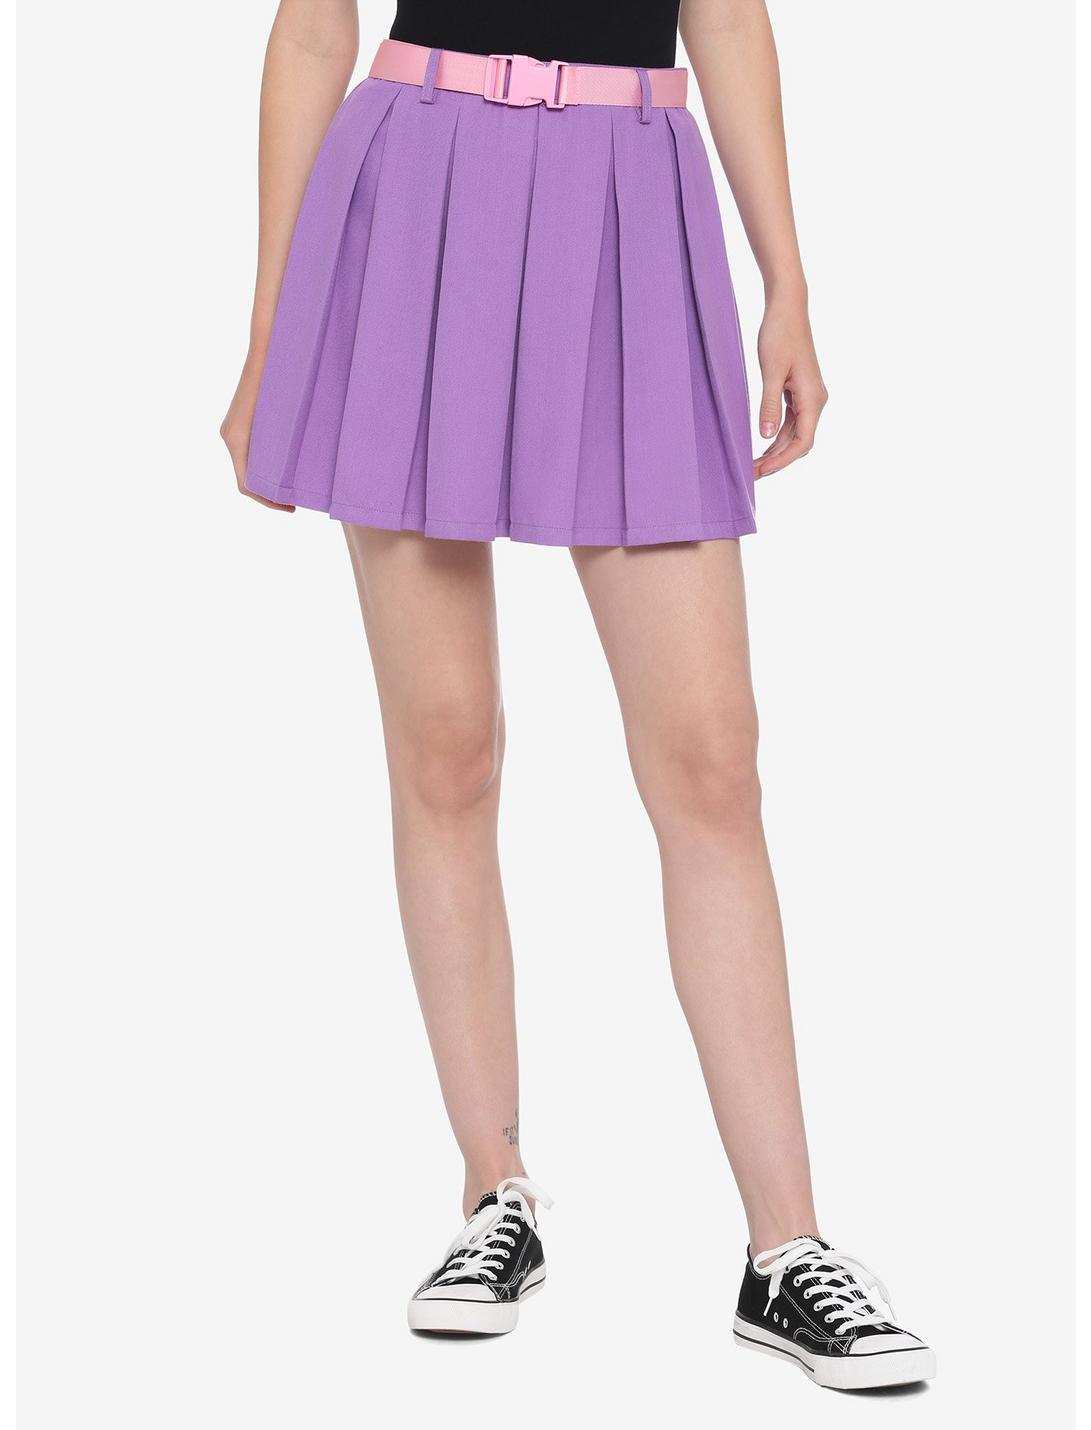 Purple Pleated Skirt With Pink Buckle Belt | Hot Topic